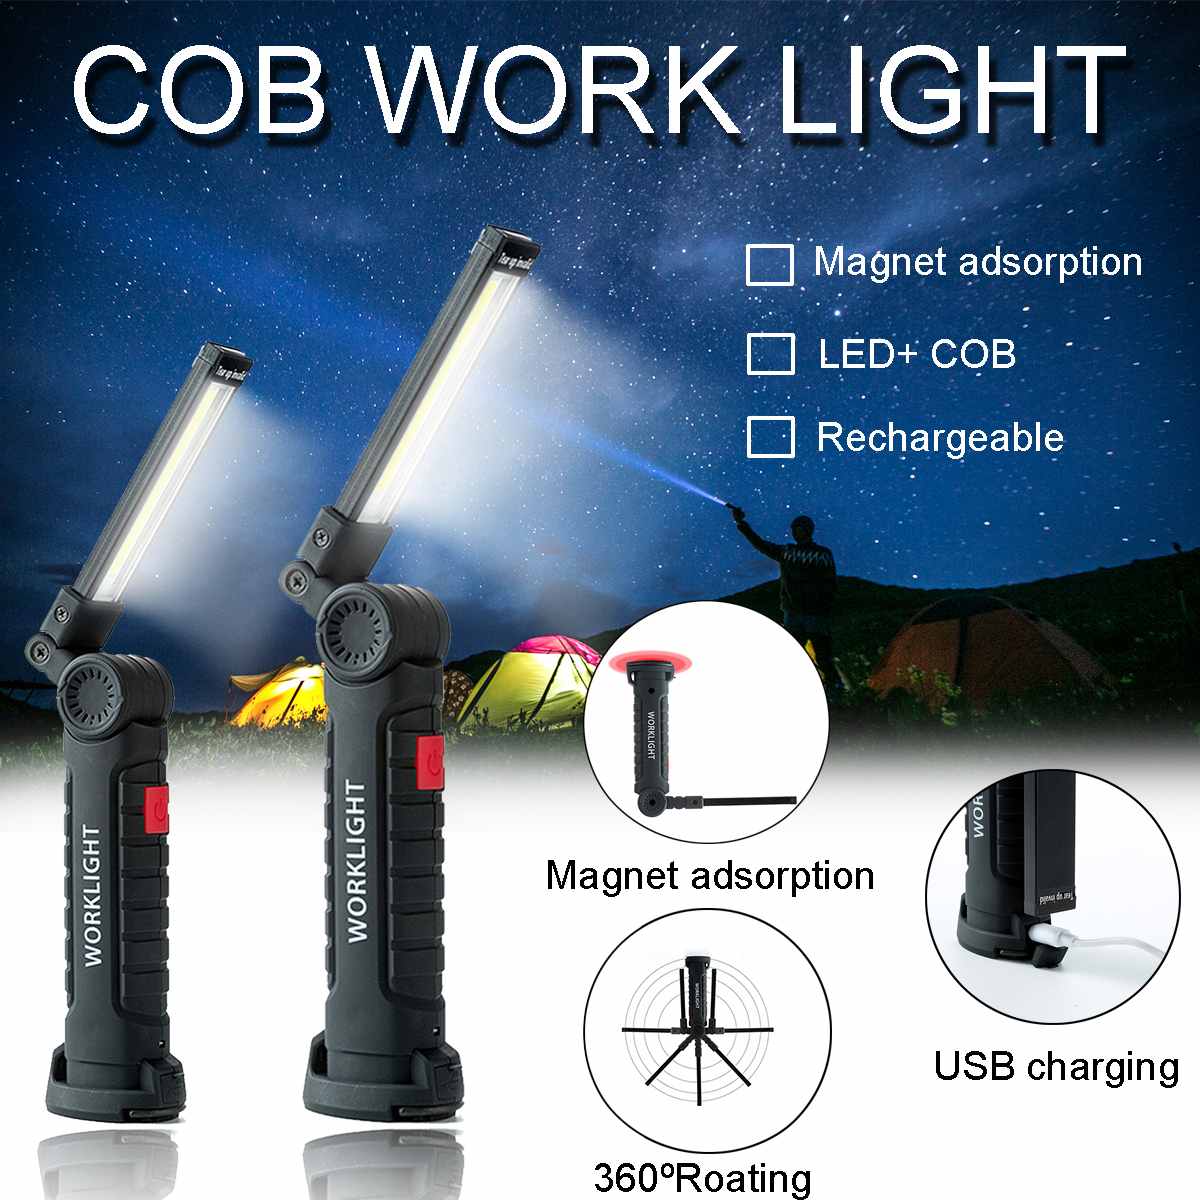 COB+LED Rechargeable Magnetic Torch Flexible Inspection Lamp Cordless Work light 